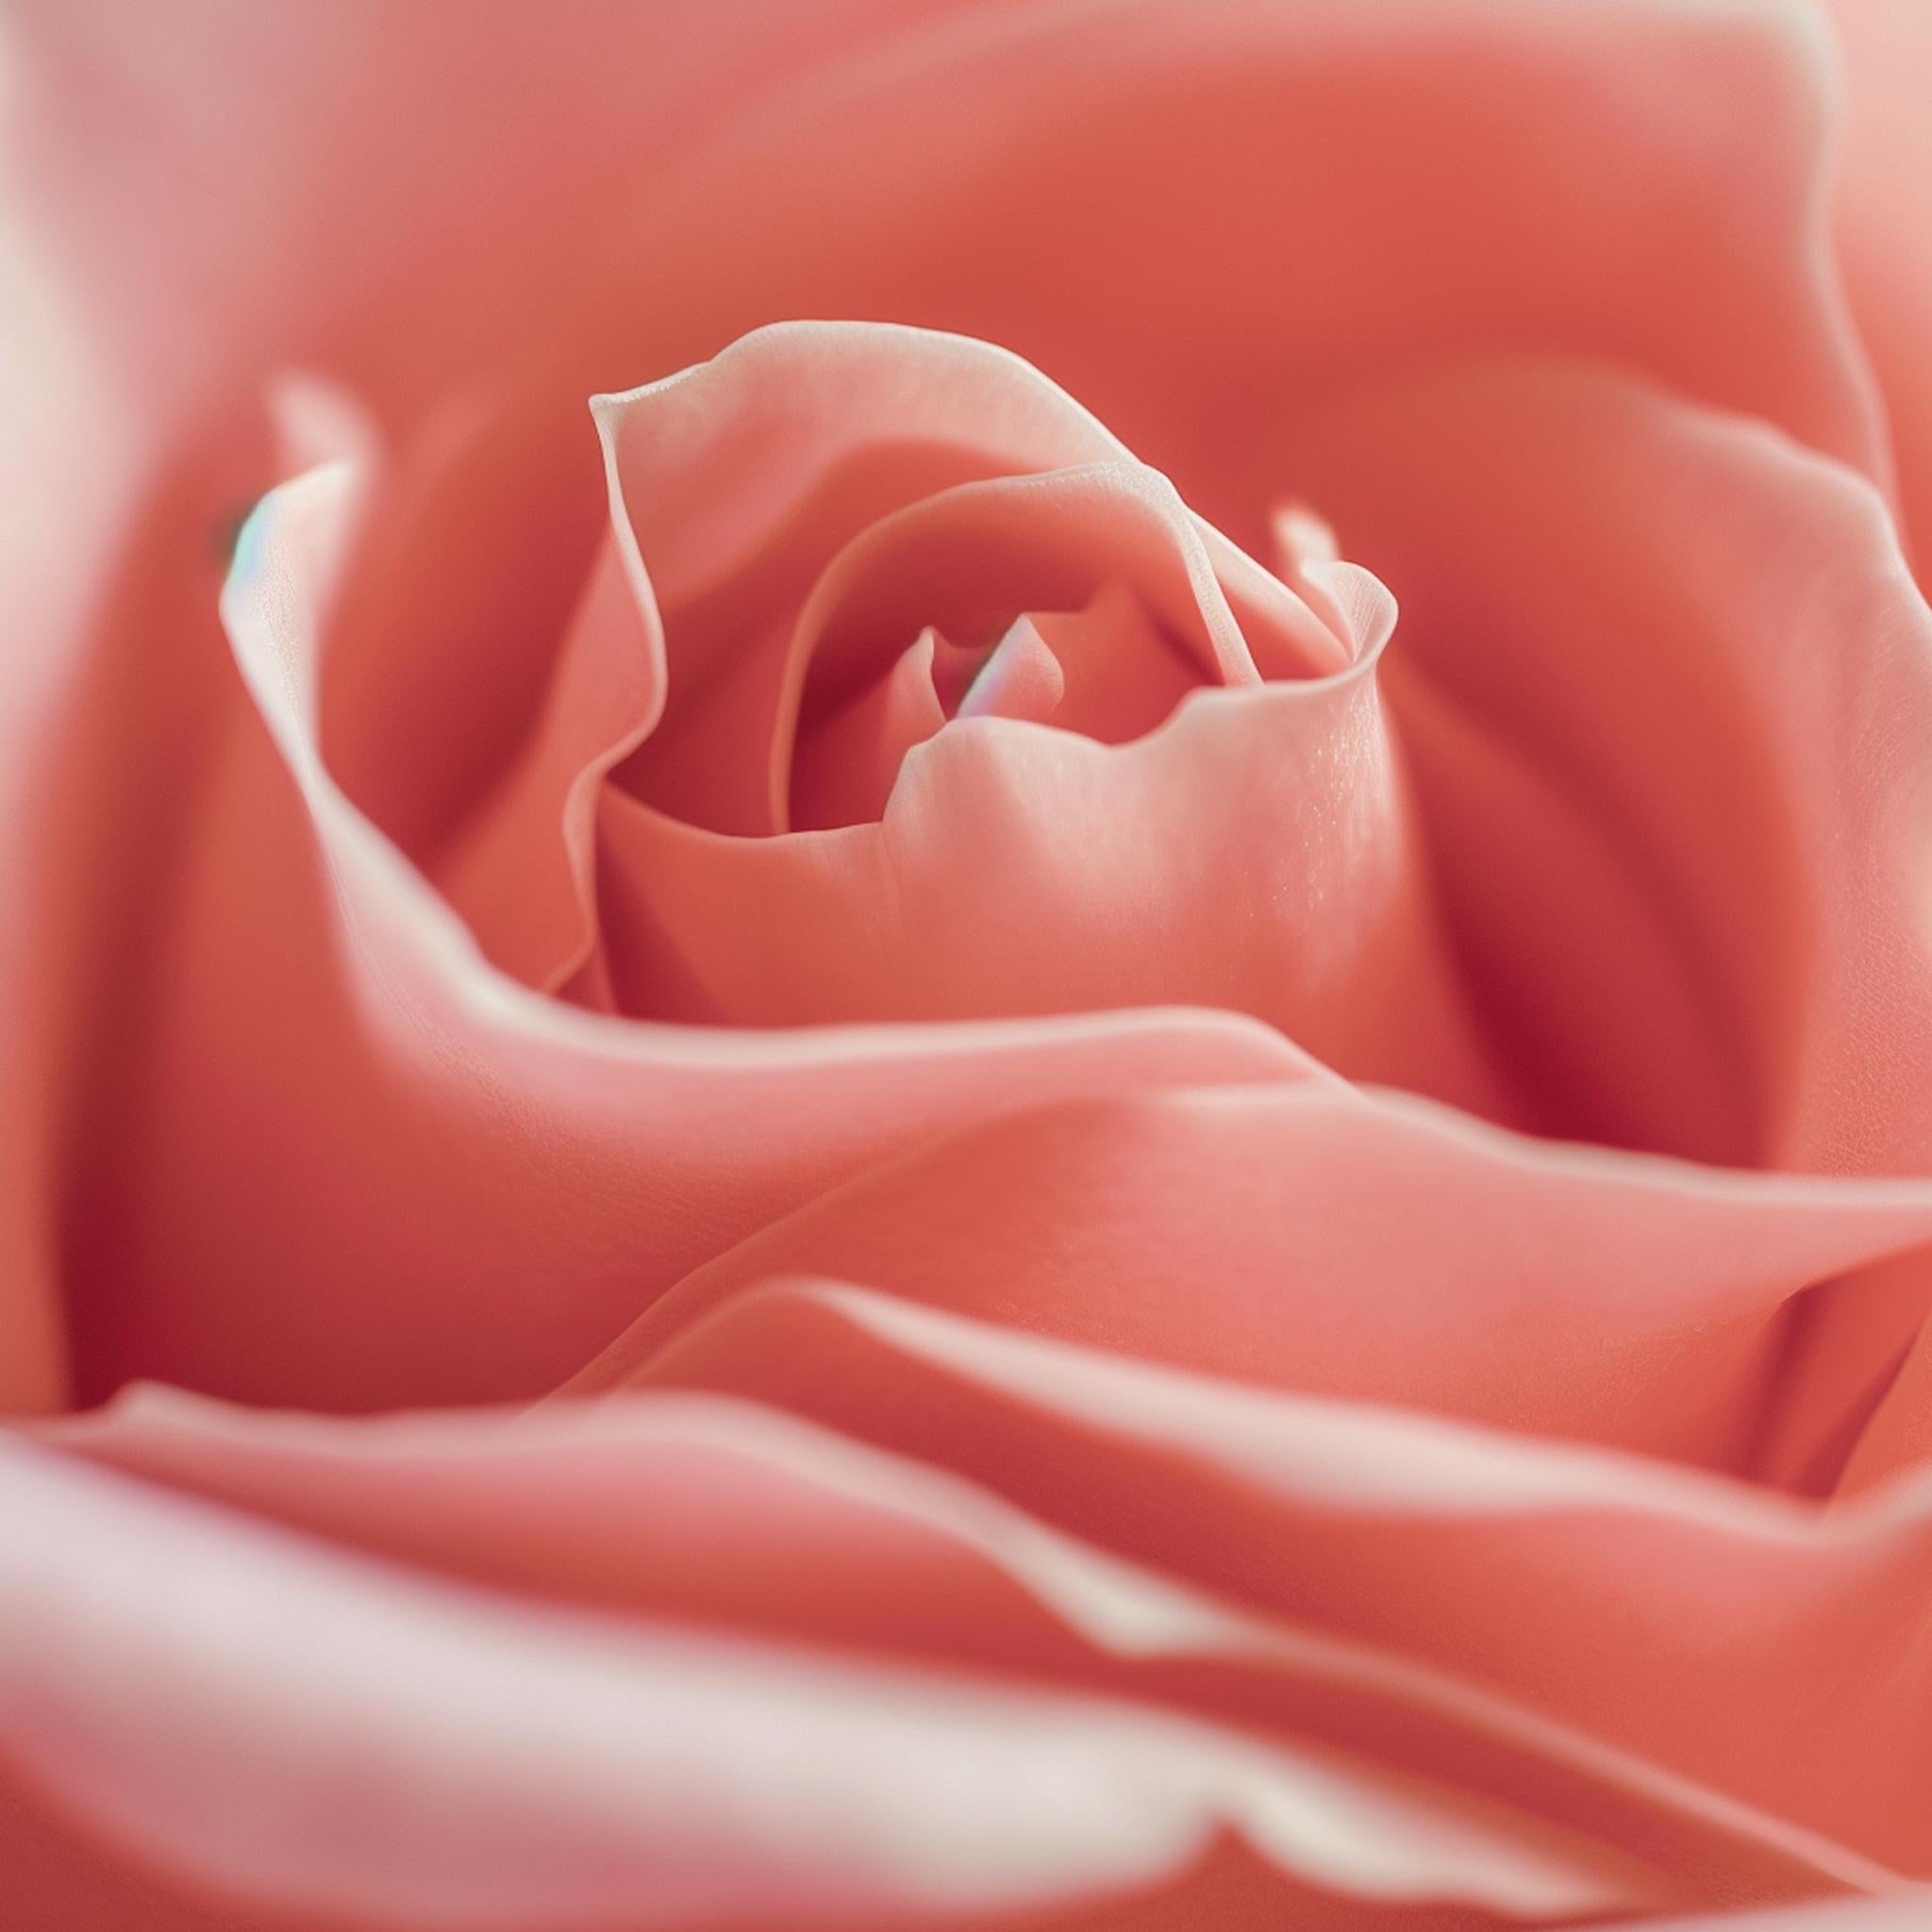 PINK ROSE (After Georgia O'Keeffe) photograph on plexiglass  - Photograph by Max Grant